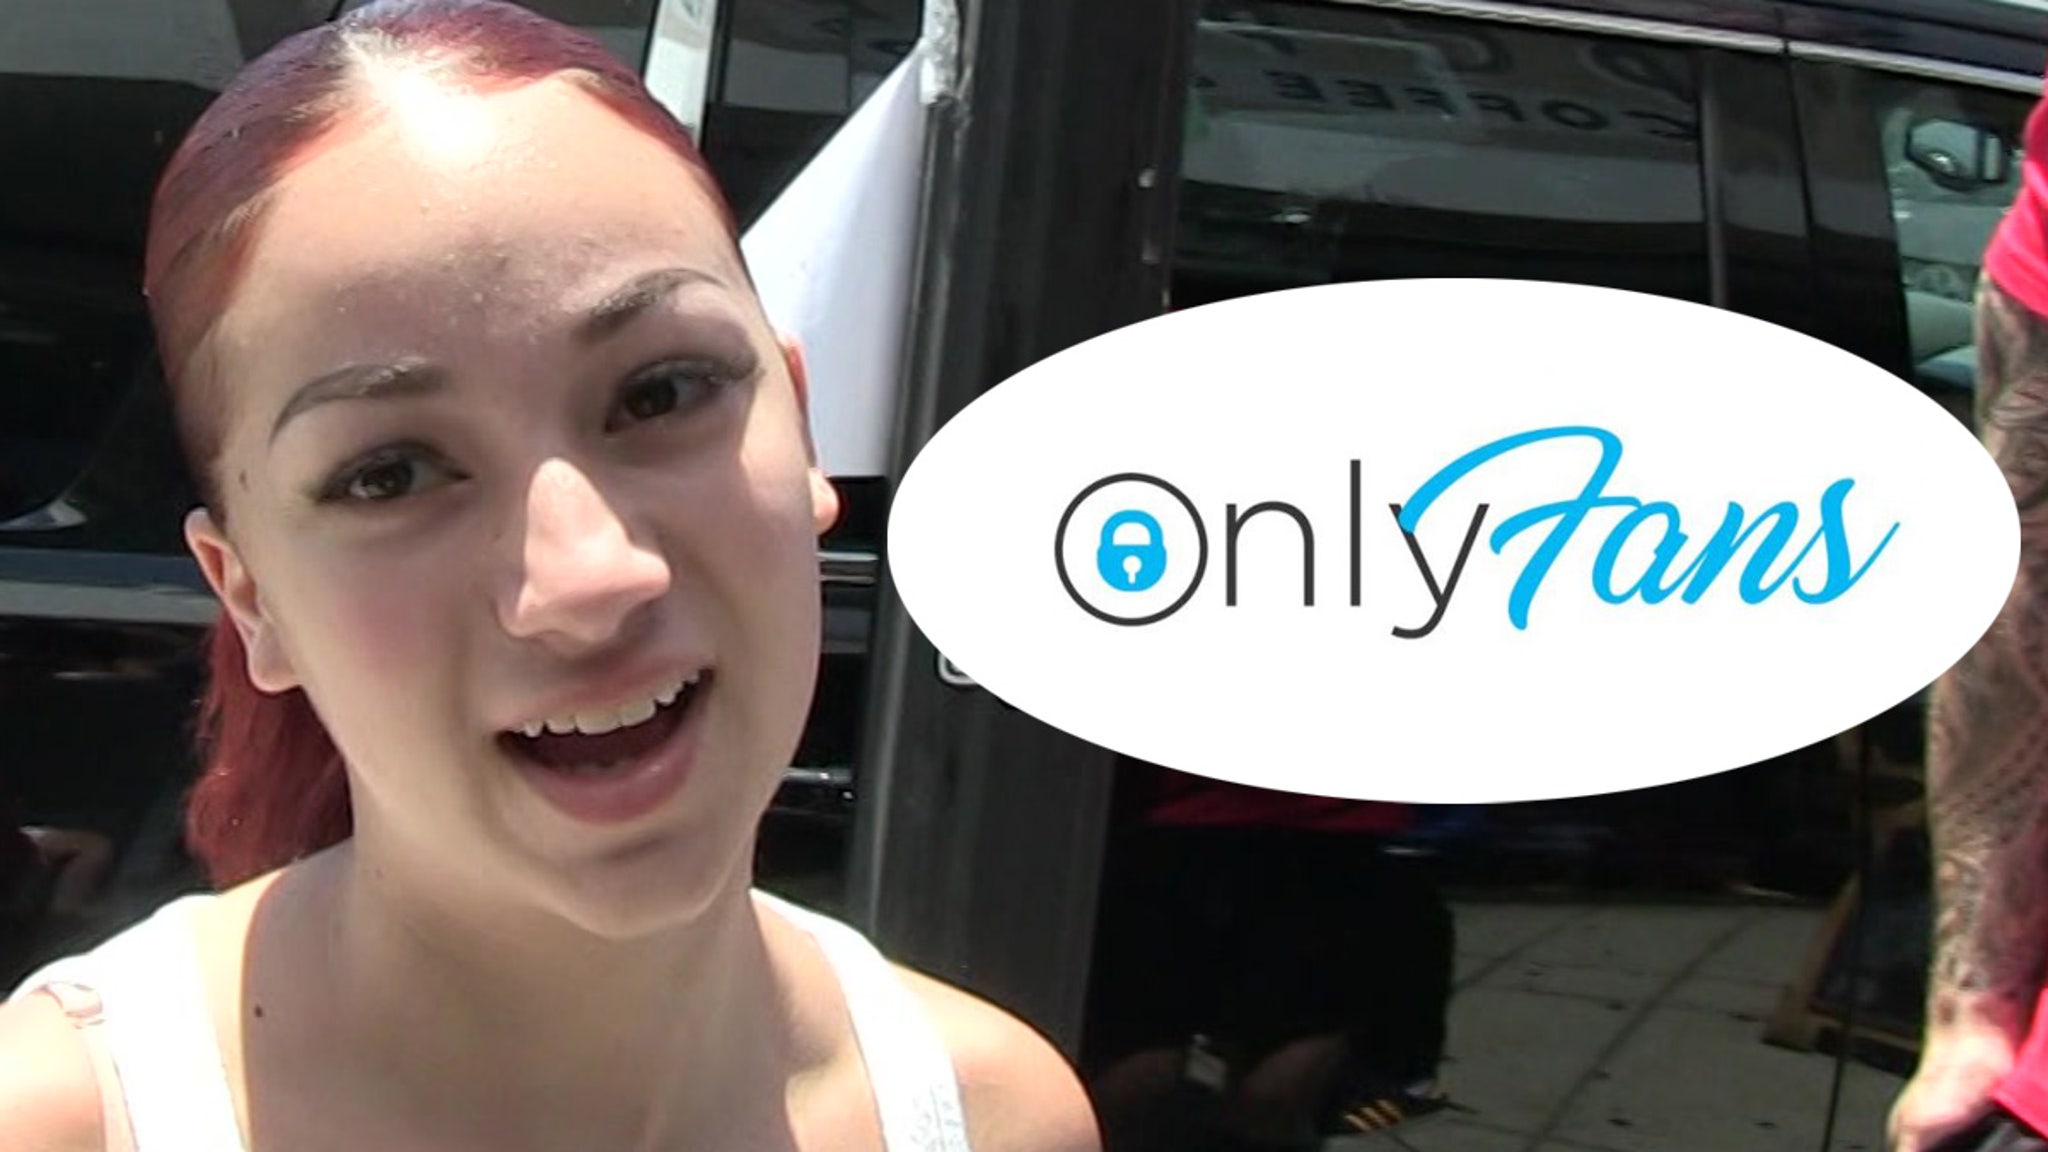 Bhabie shows alleged proof she made $50 million on onlyfans